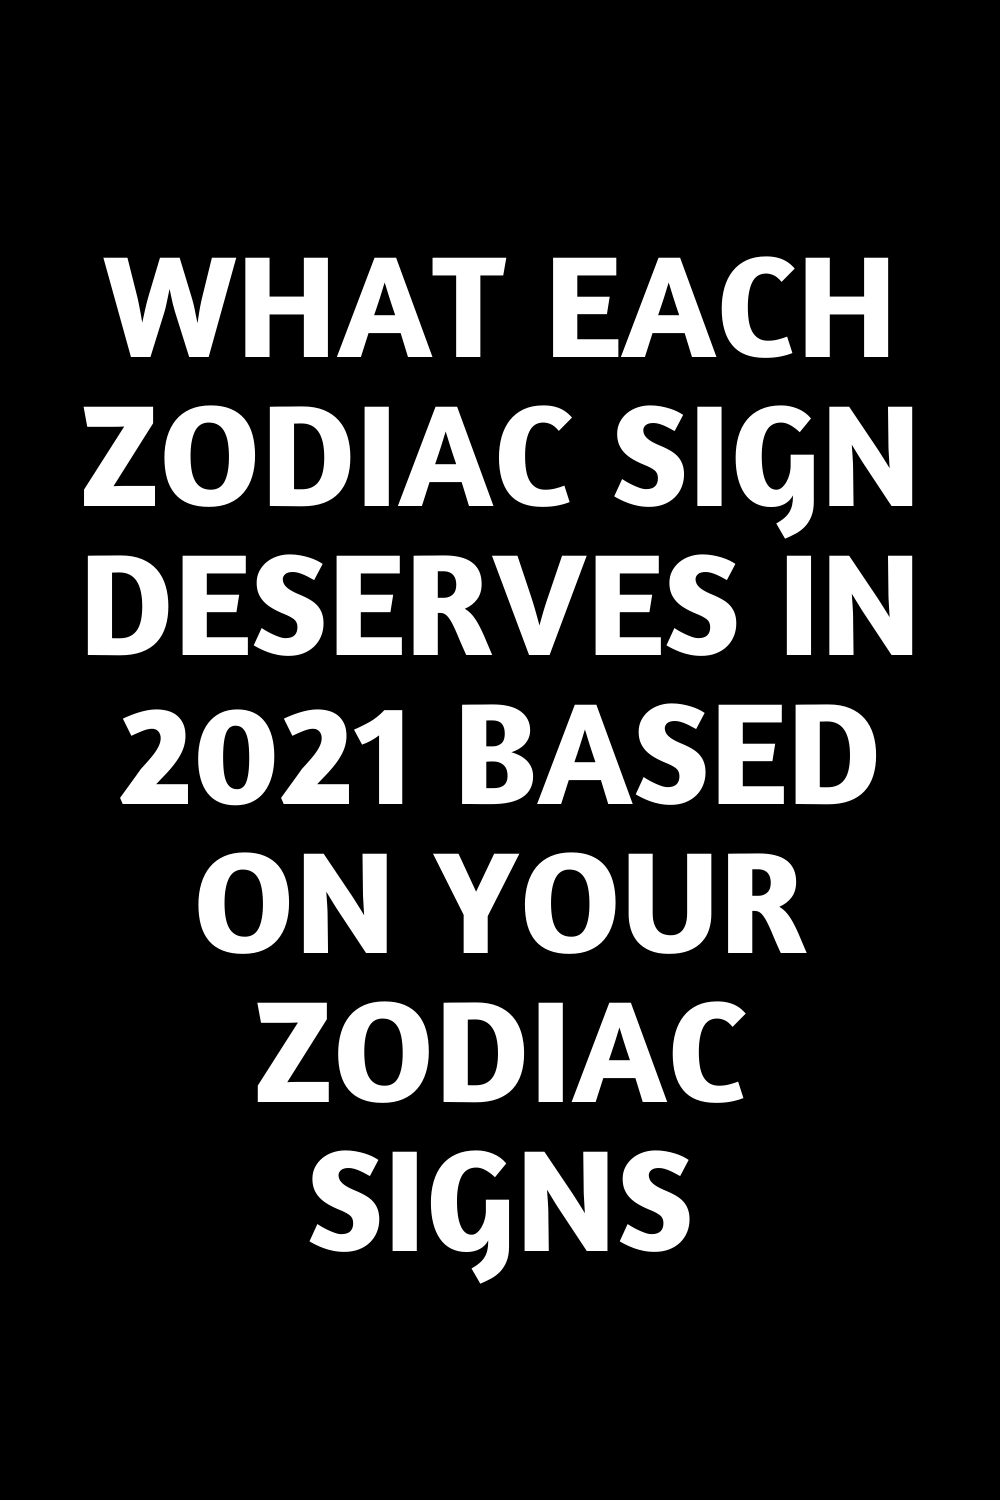 WHAT EACH ZODIAC SIGN DESERVES IN 2021 BASED ON YOUR ZODIAC SIGNS ...